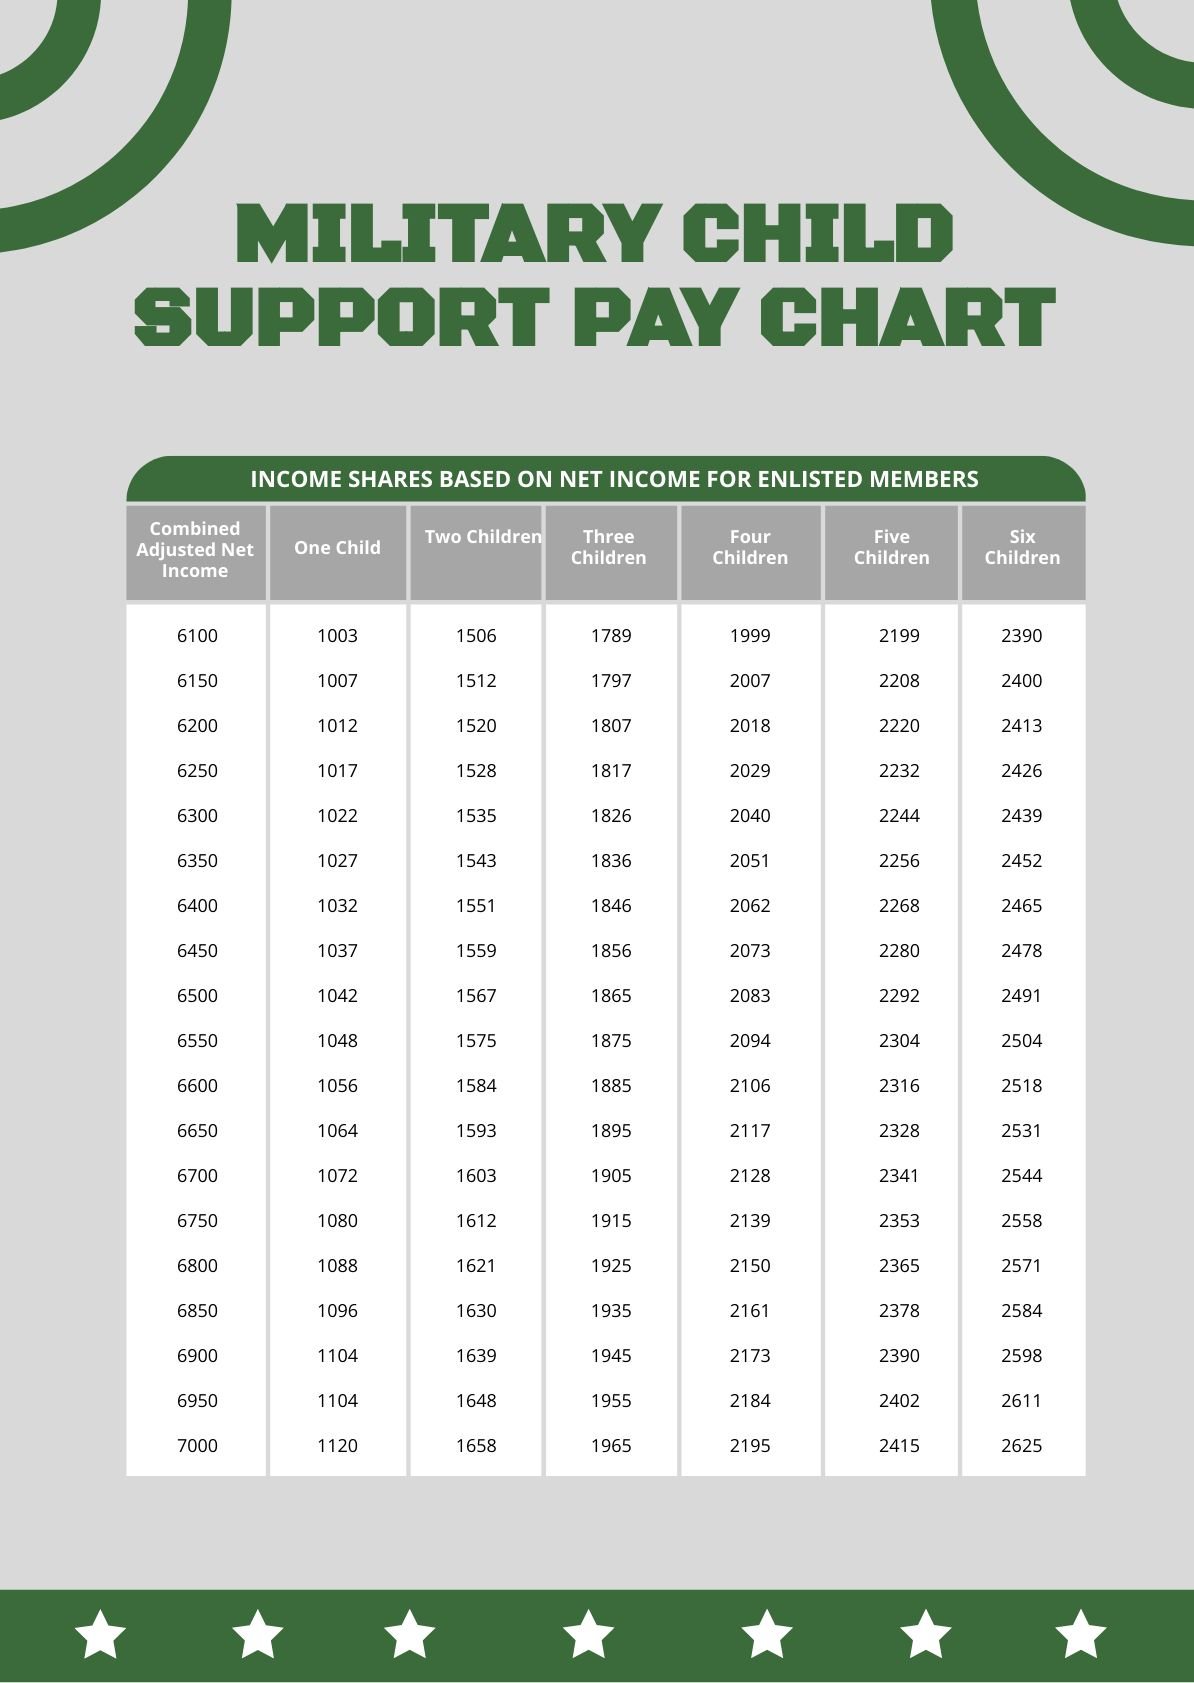 Military Child Support Pay Chart in PDF